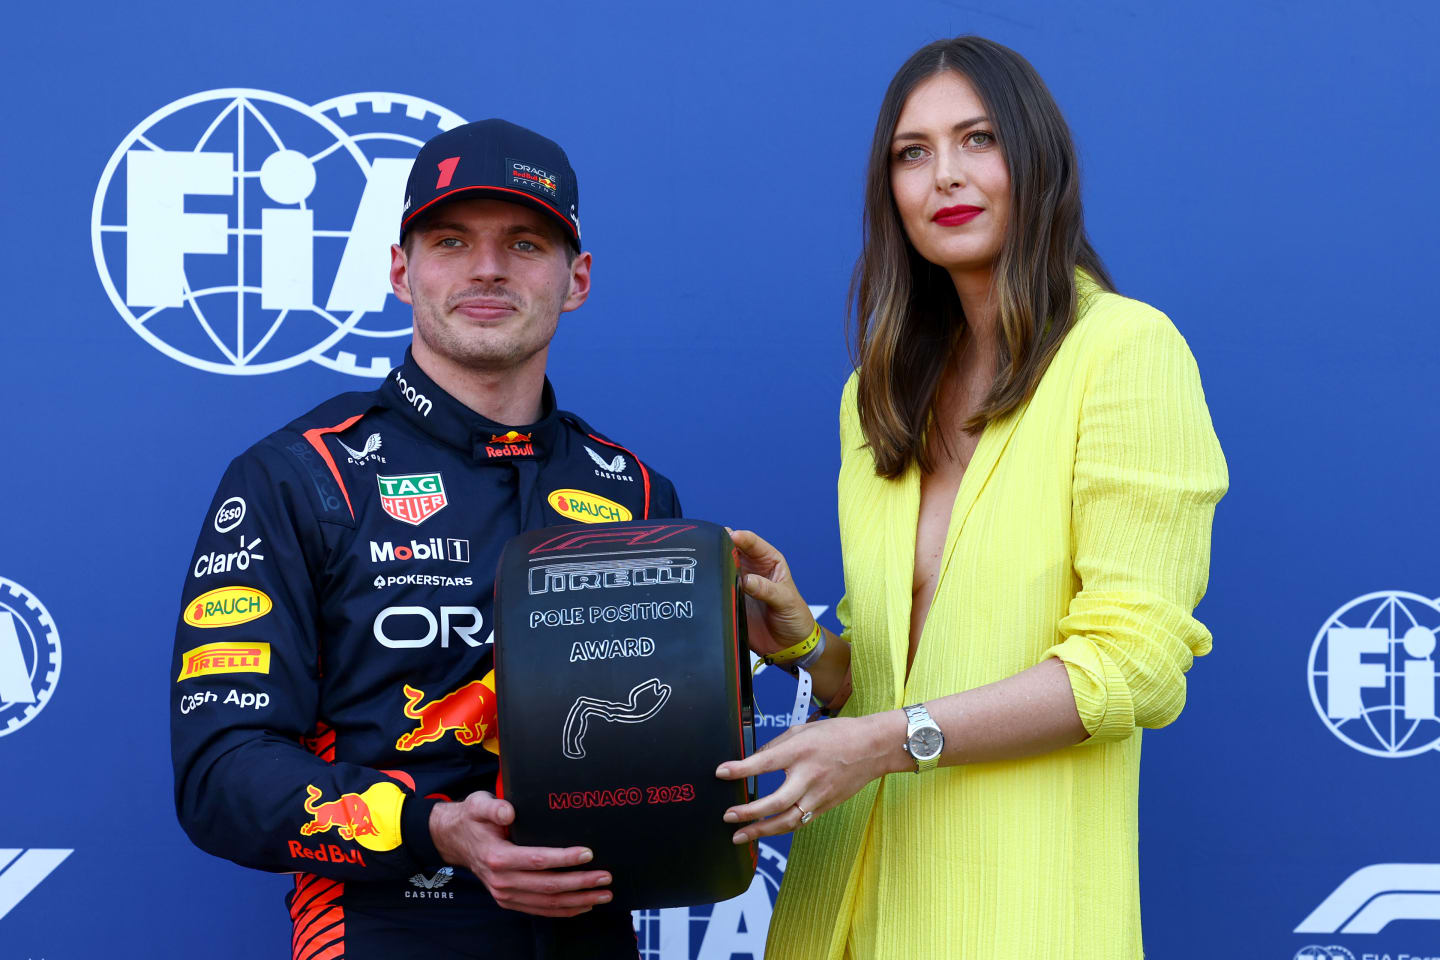 MONTE-CARLO, MONACO - MAY 27: Pole position qualifier Max Verstappen of the Netherlands and Oracle